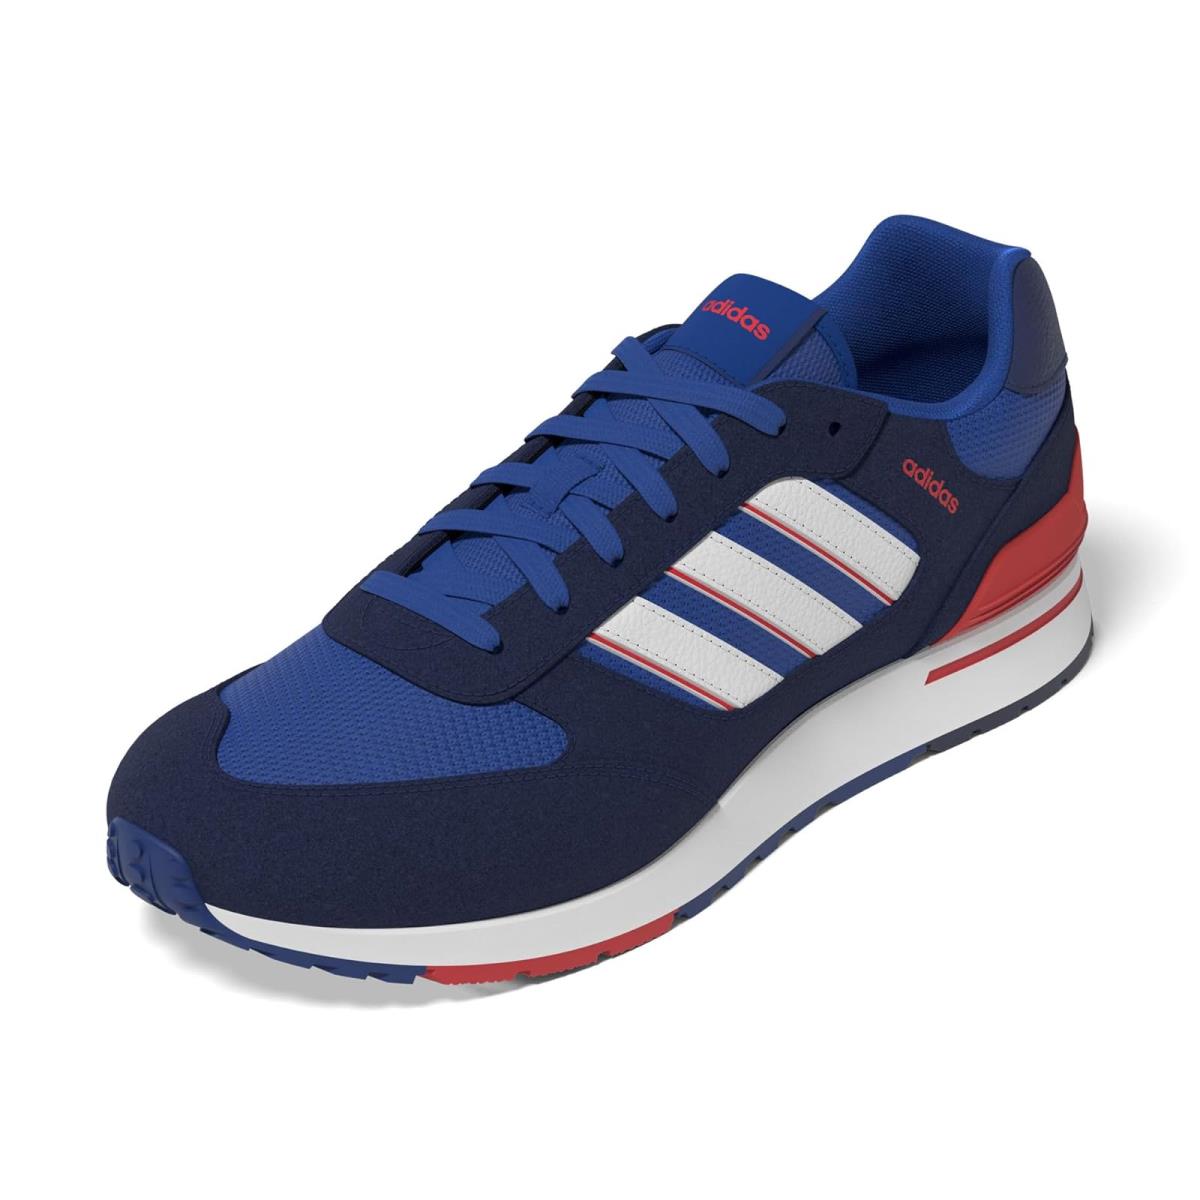 Man`s Sneakers Athletic Shoes Adidas Running Run 80s Dark Blue/White/Bright Red